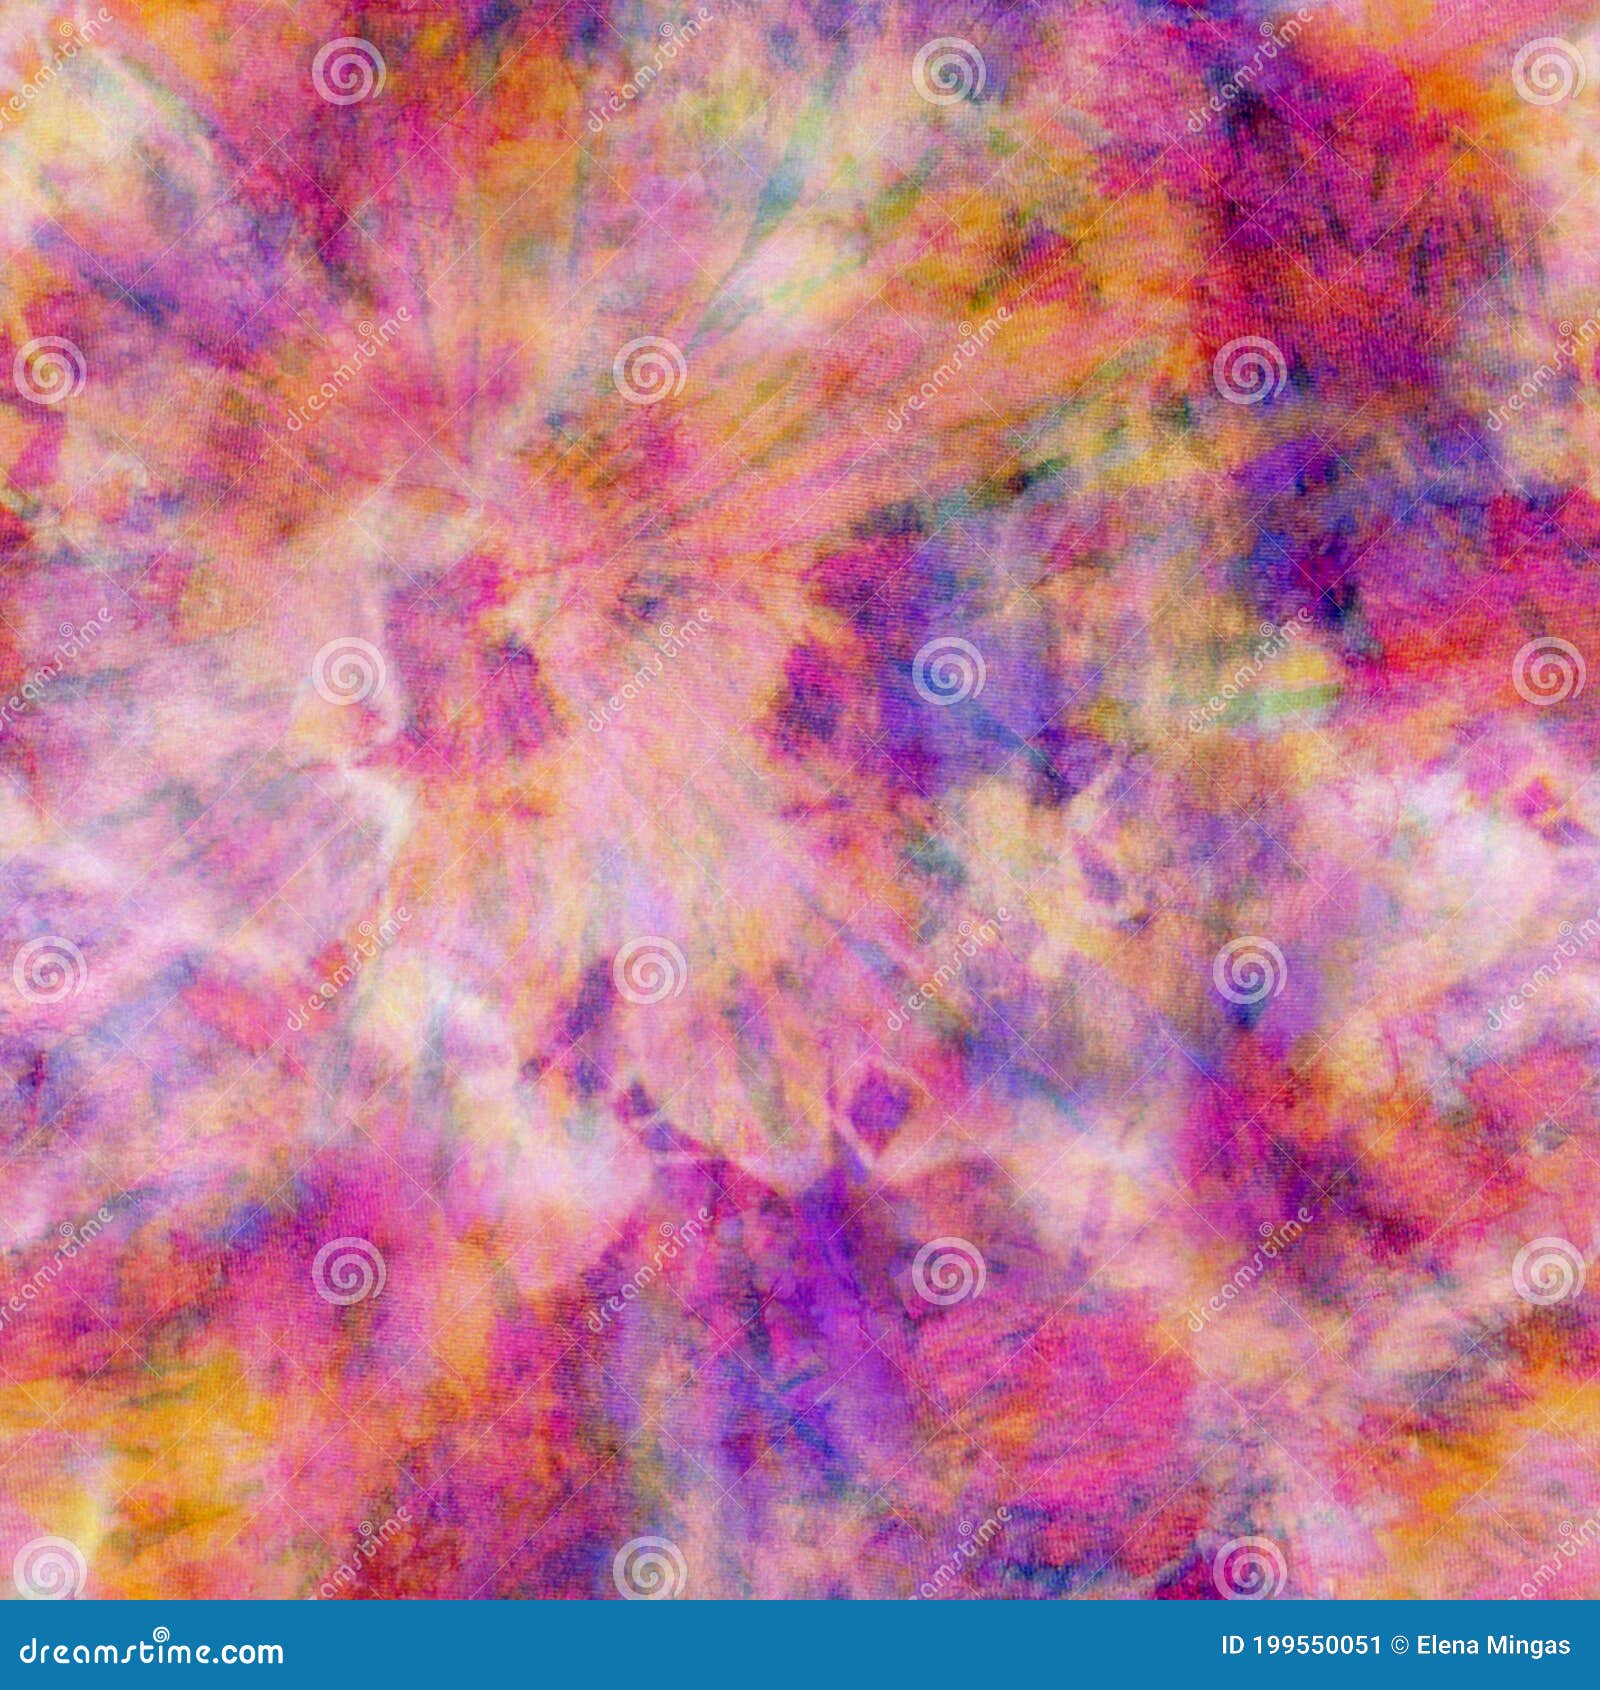 tie dye abstract pattern in gradient colour bleed